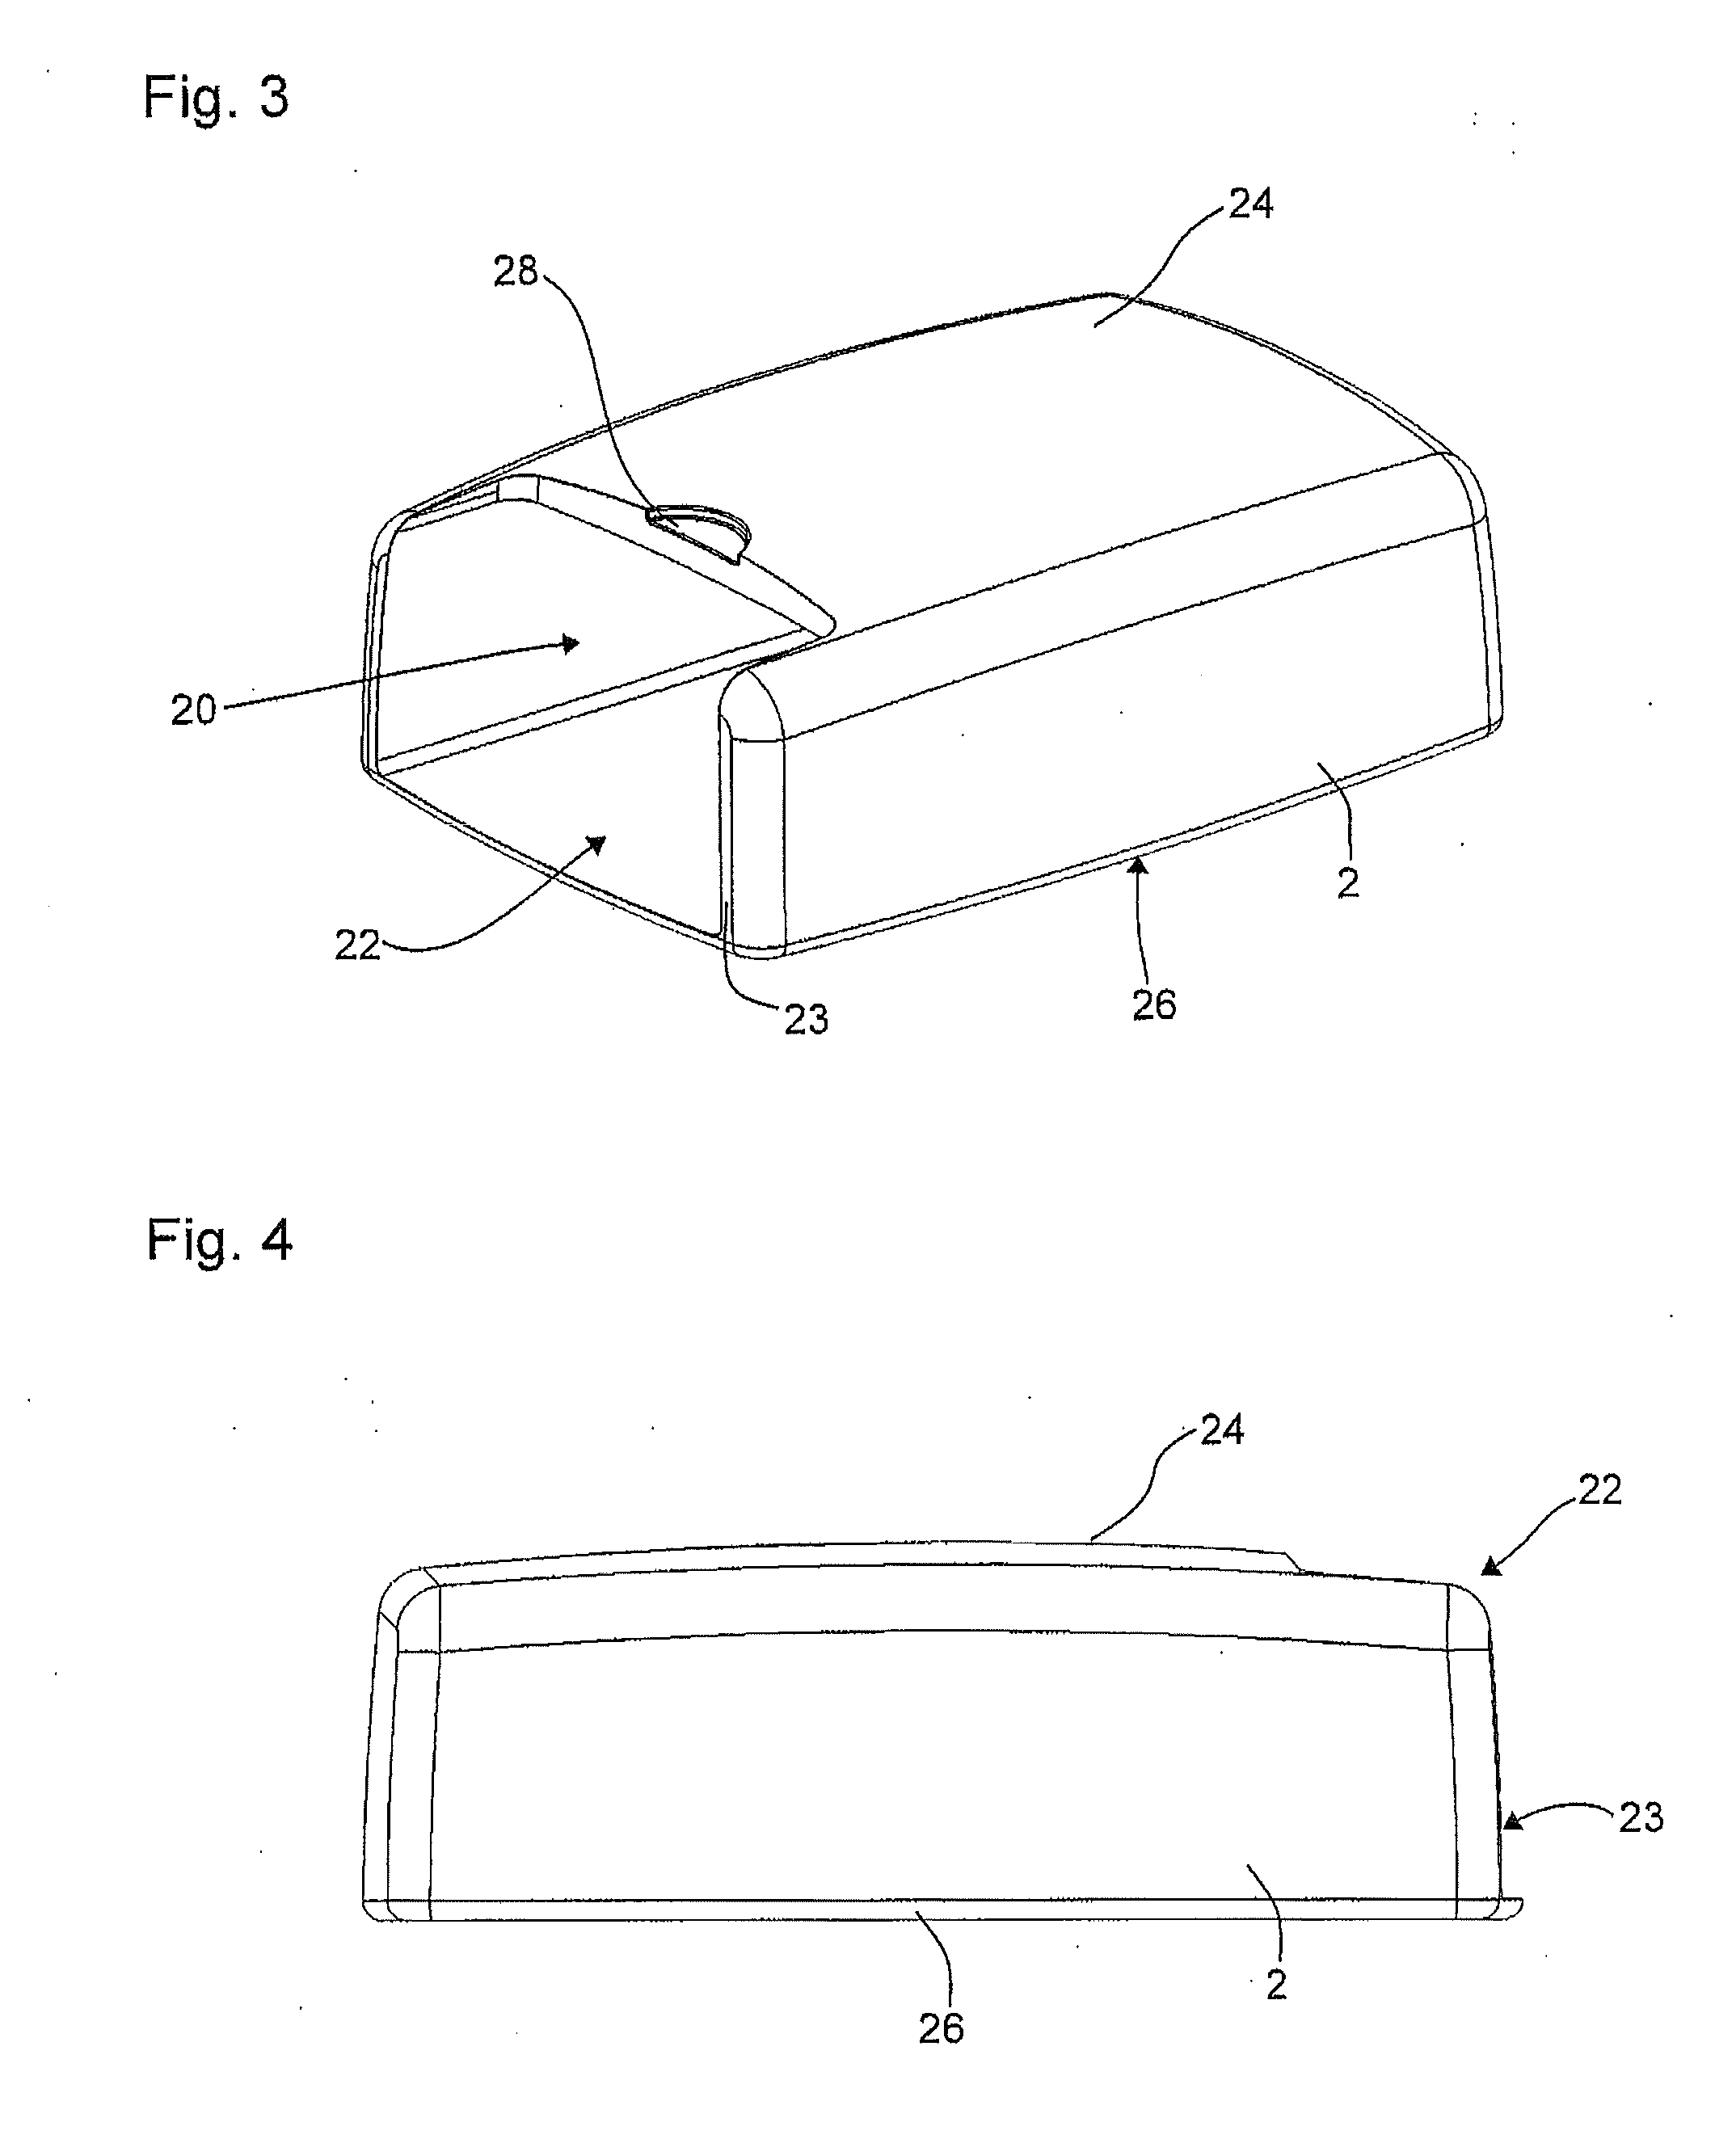 Dispenser for dispensing paper, nonwovens and/or wipes